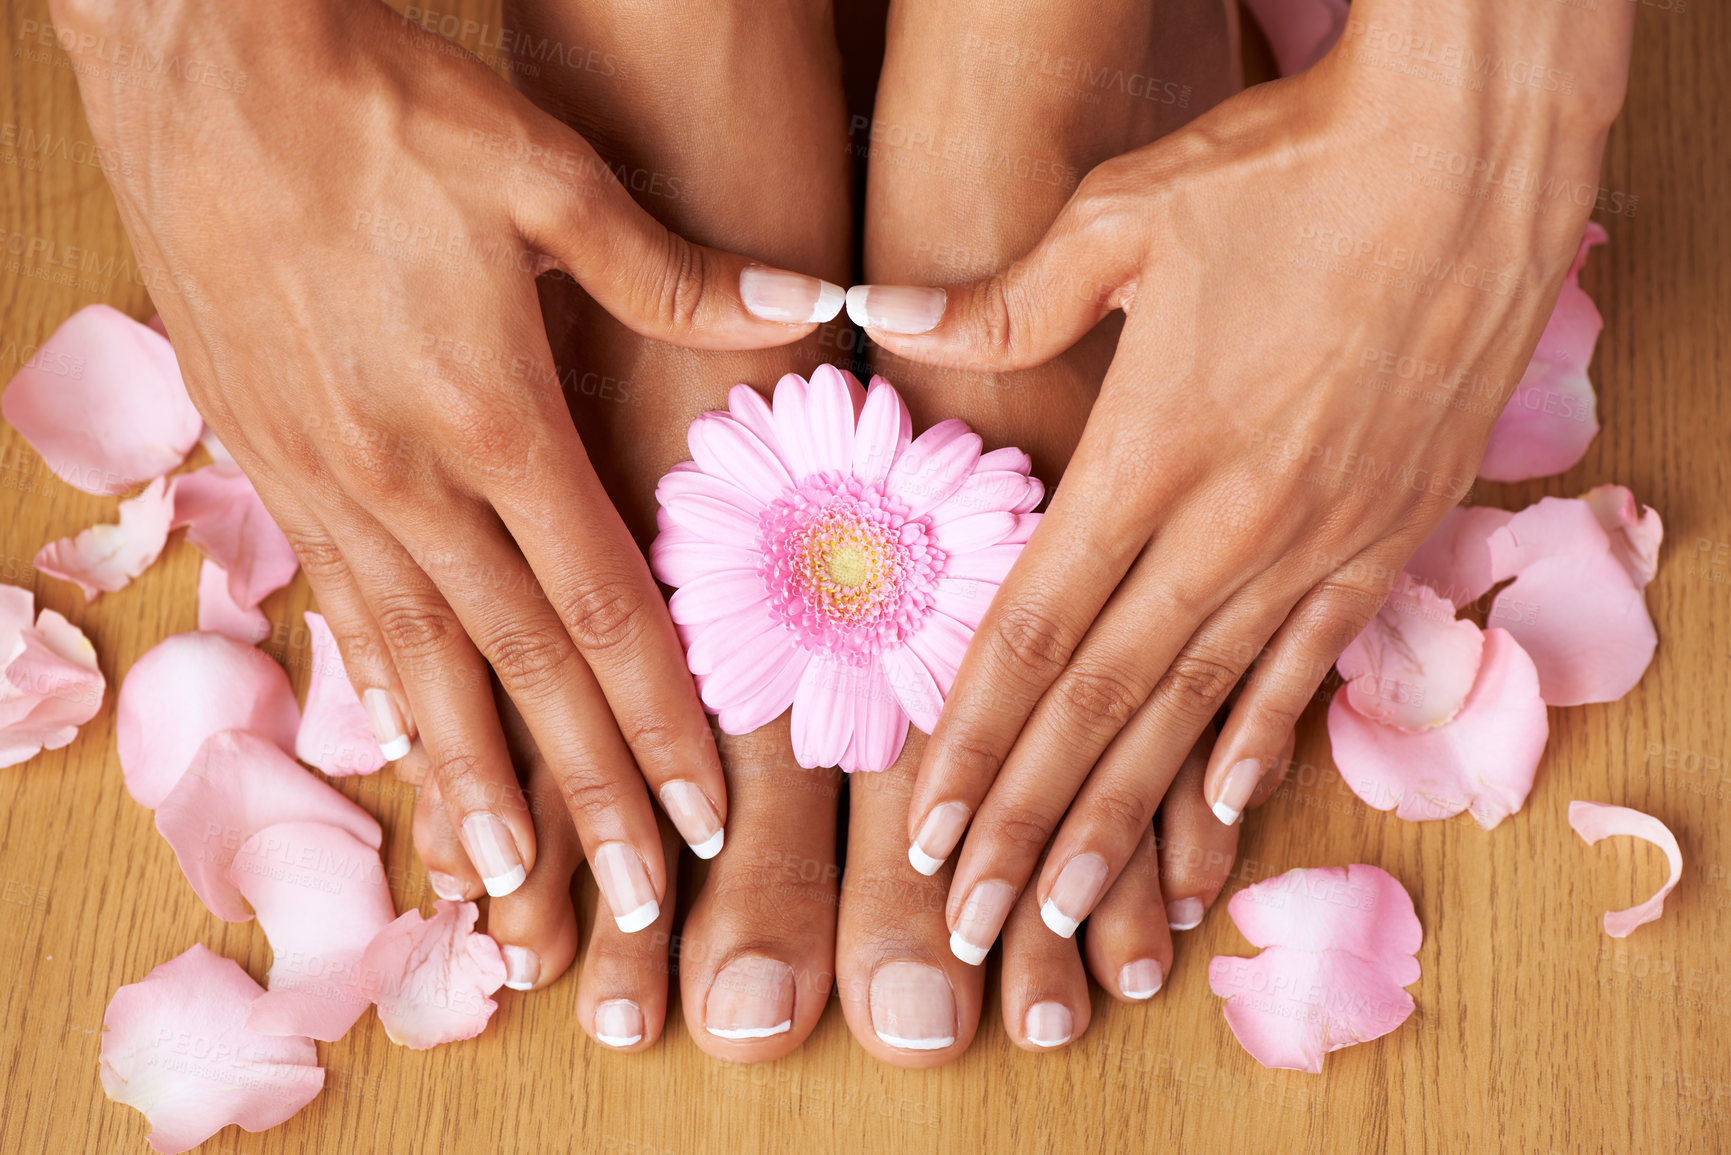 Buy stock photo Salon girl and hands with flower on feet for luxury cosmetic treatment with manicure and pedicure nails zoom. Healthy skincare of black woman with daisy and petals for beauty, spa and wellness.

